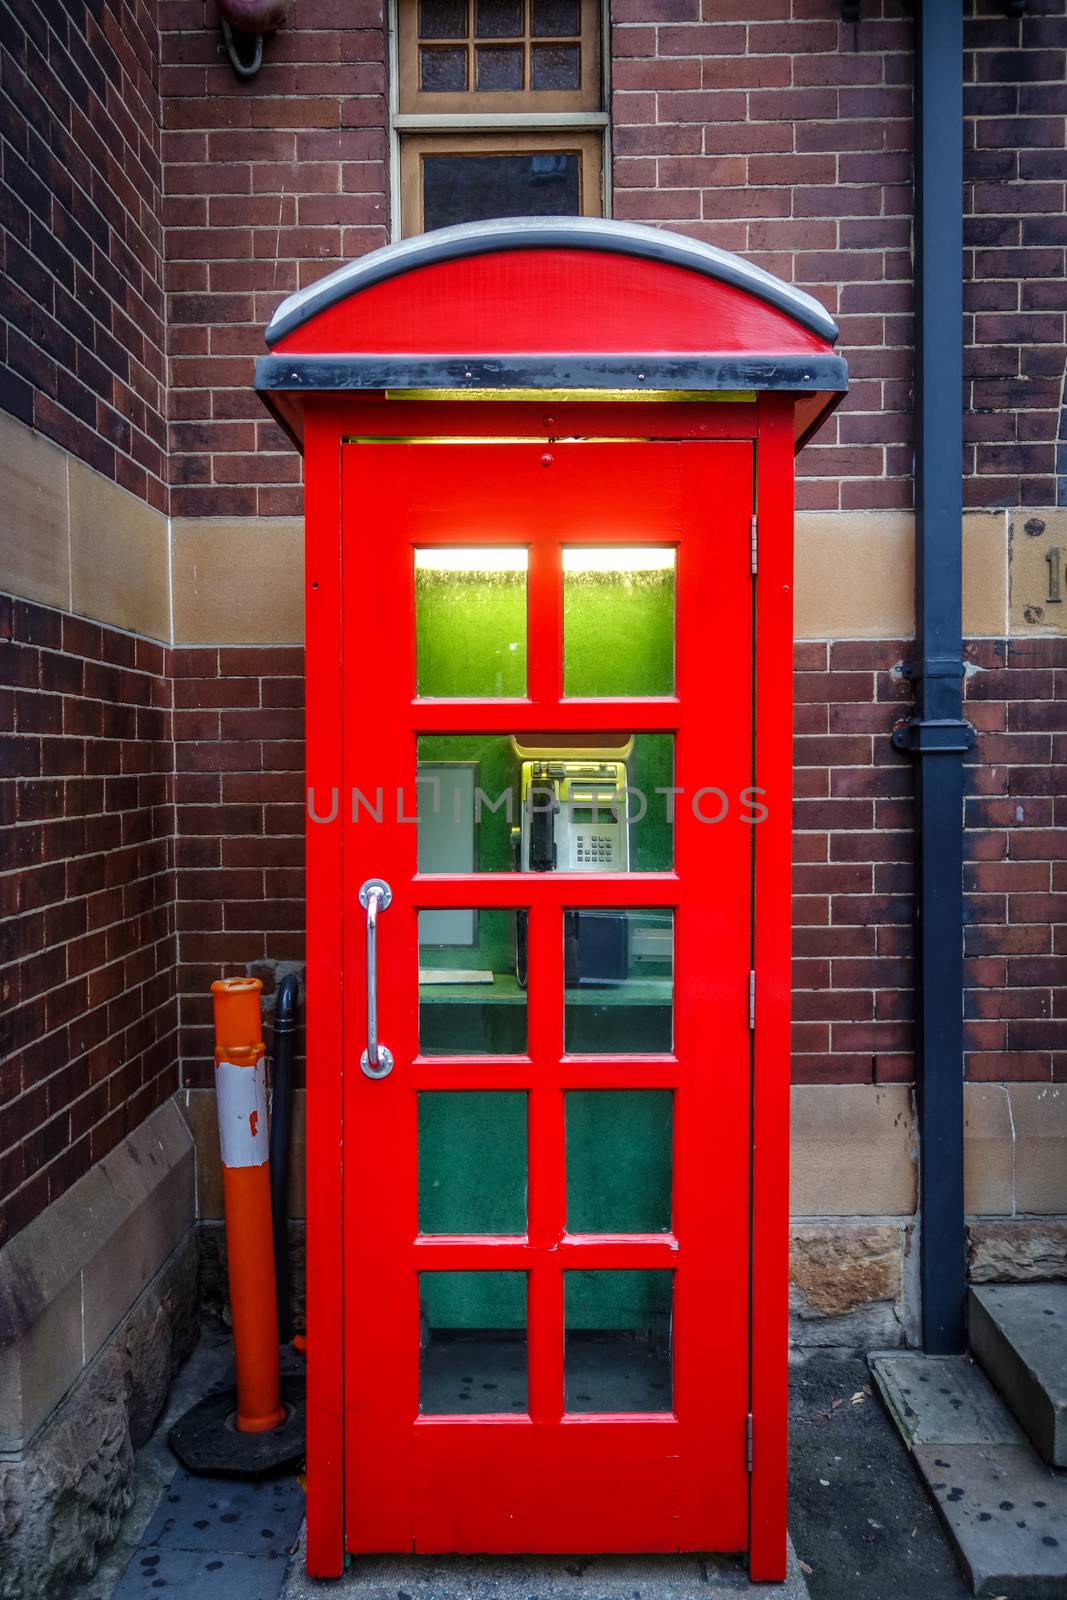 Vintage UK red phone booth by daboost